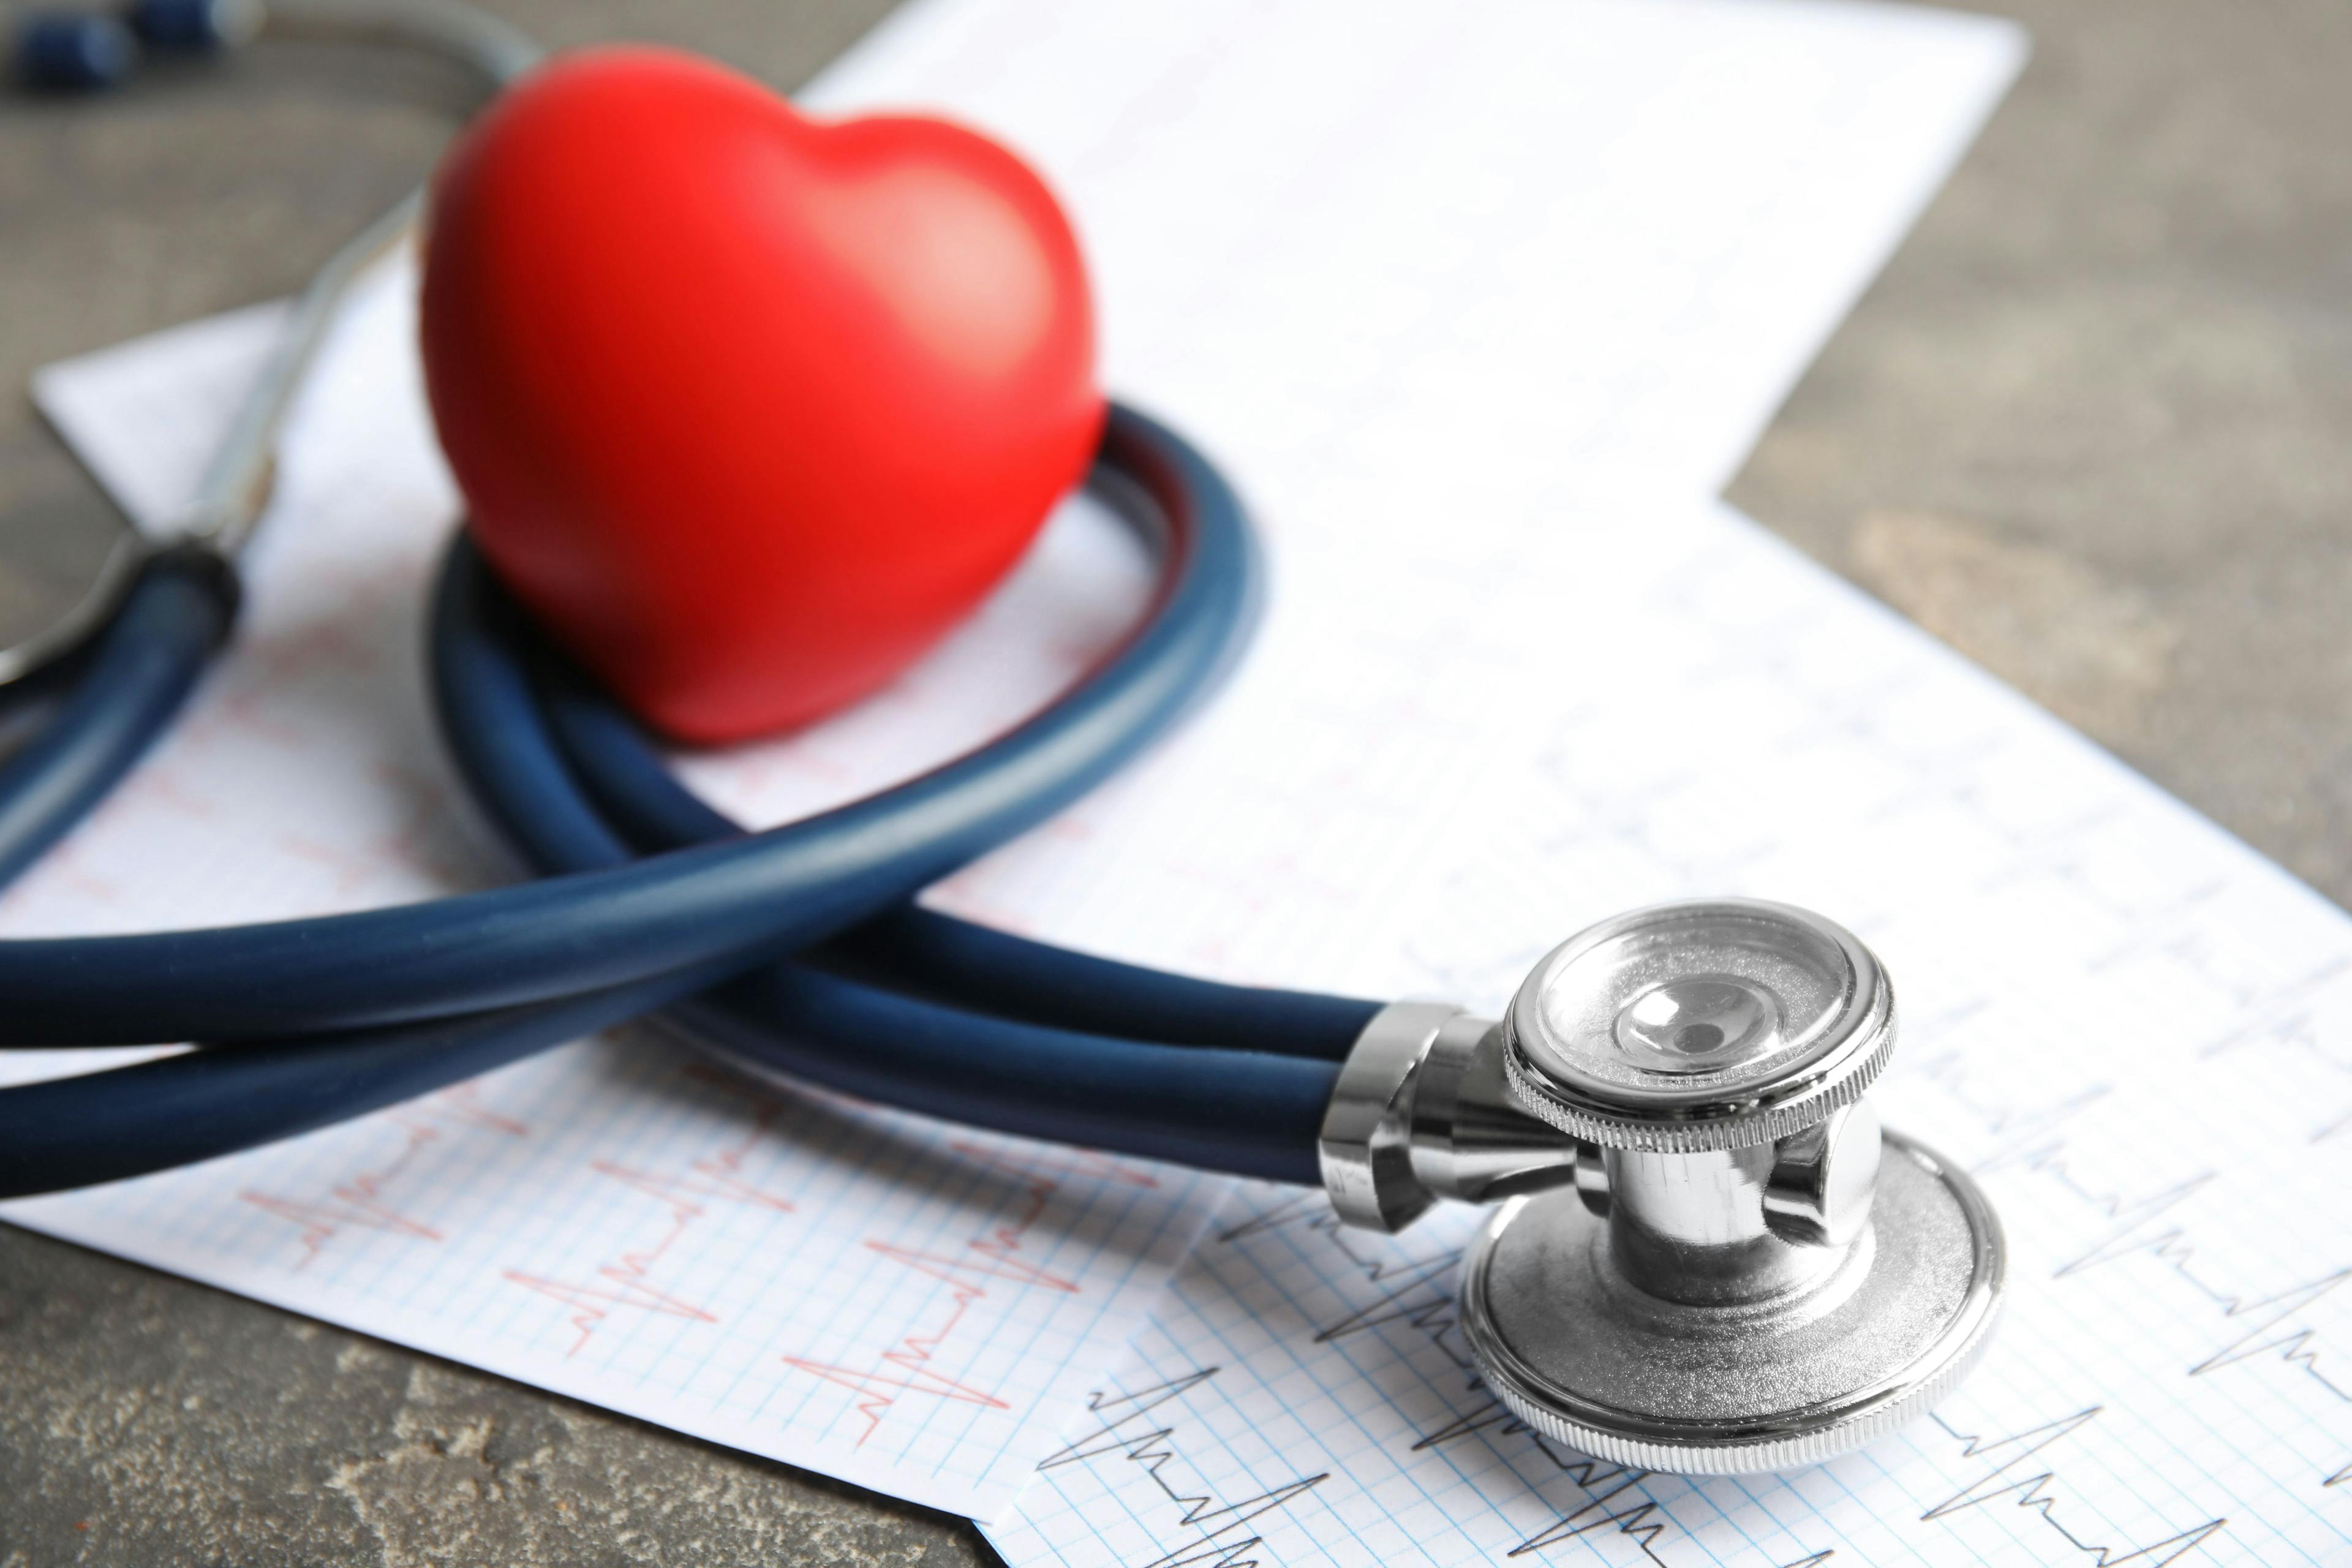 Stethoscope, red heart and cardiogram on gray table. | Image Credit: New Africa - stock.adobe.com